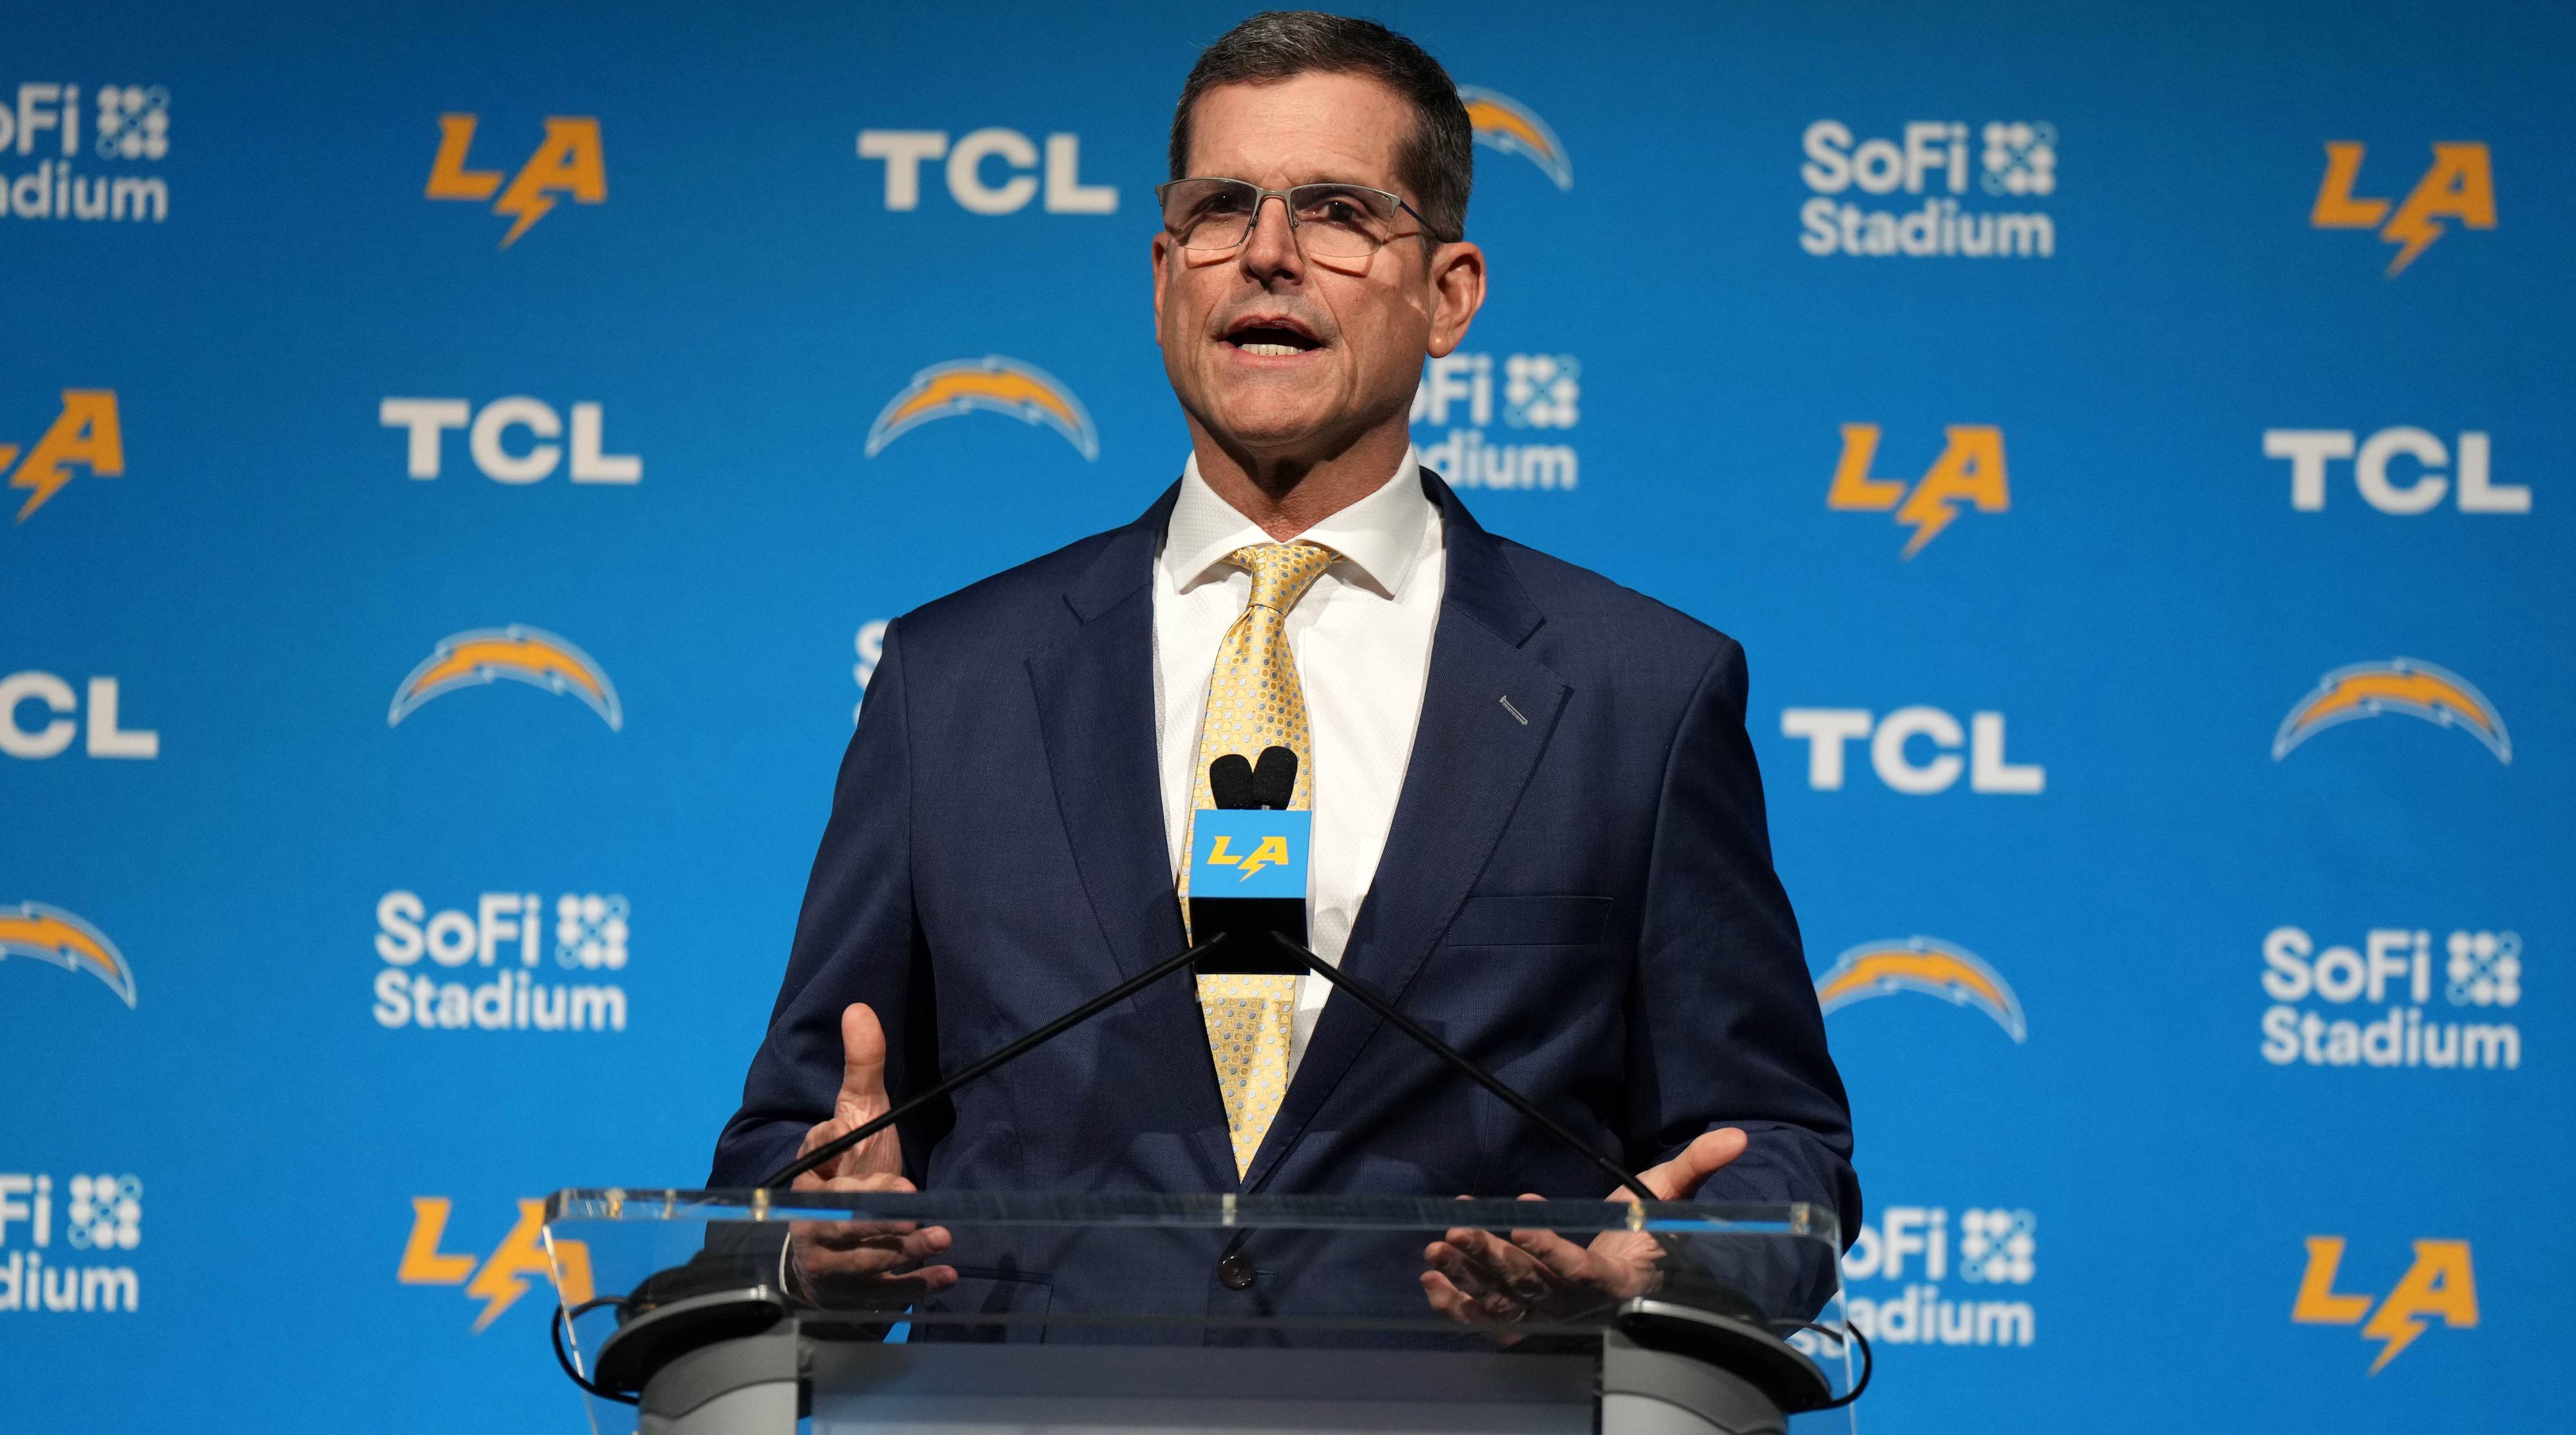 Chargers head coach Jim Harbaugh speaks with the media at his introductory press conference.